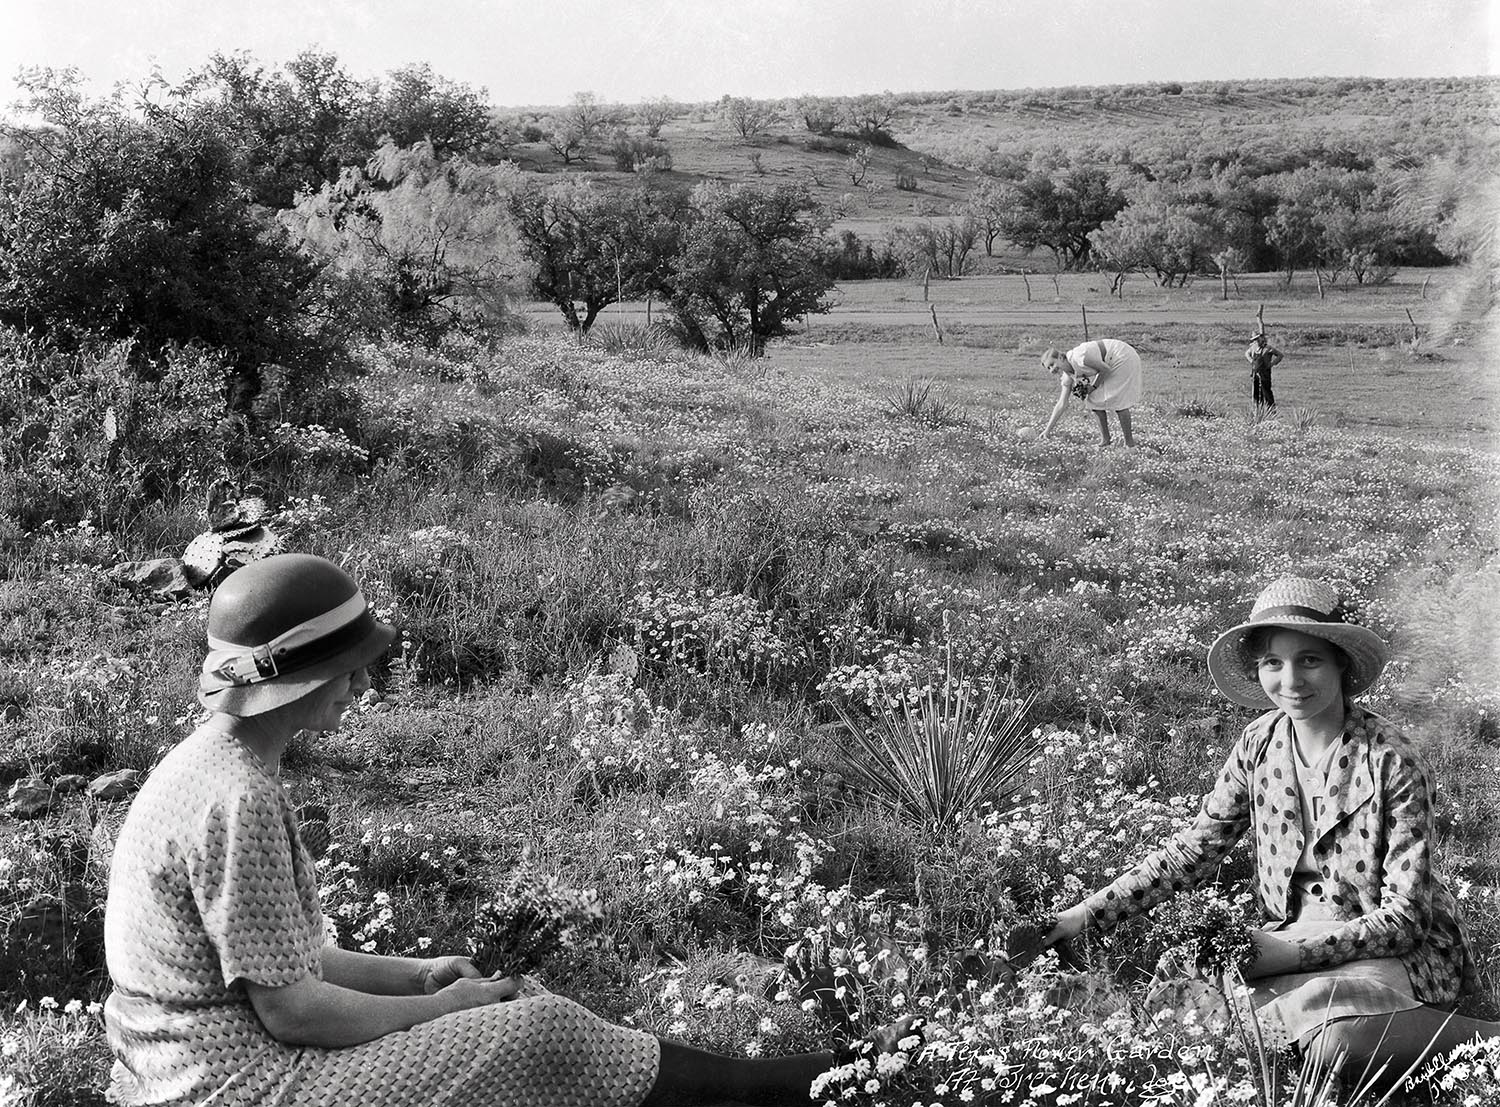 Women enjoy a spring day and pick wildflowers in Breckenridge, Texas in 1935.